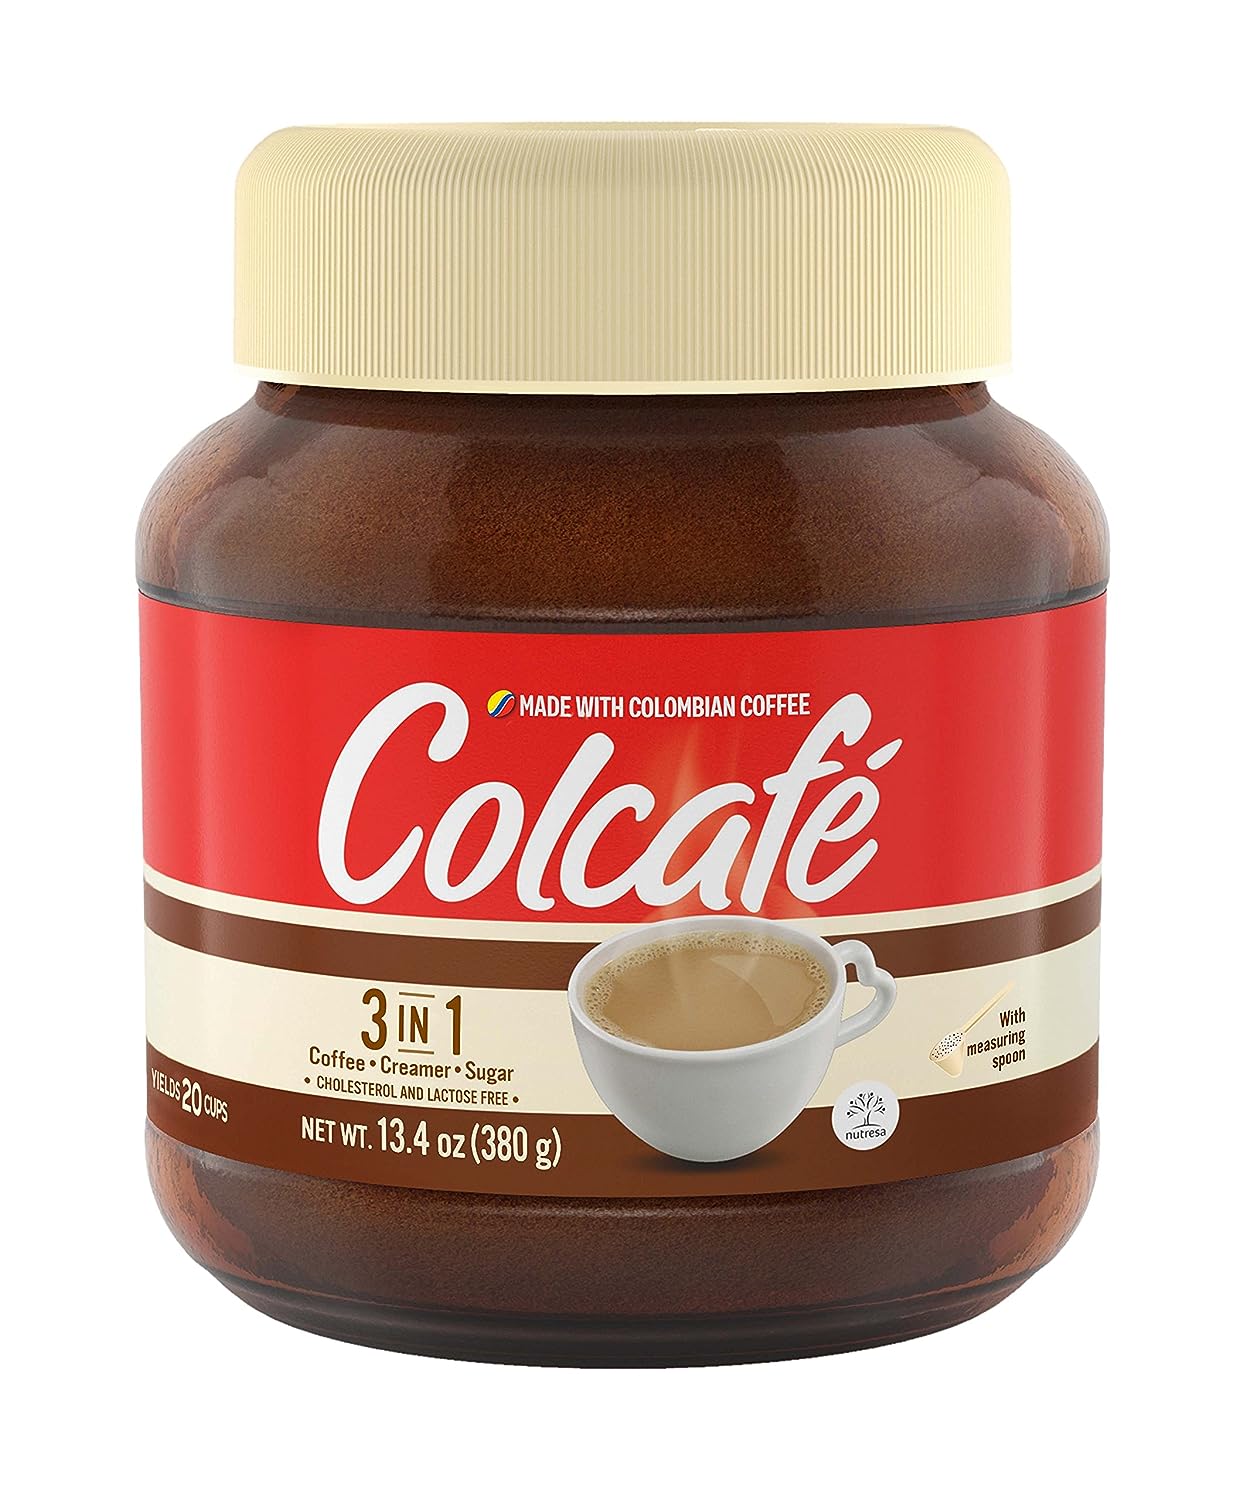 Colcafé 3-in-1 Coffee Mix Jar | Coffee, Cream & Sugar in a Delicious Cup | Cholesterol Free | 100% Colombian Coffee | (Pack of 1)